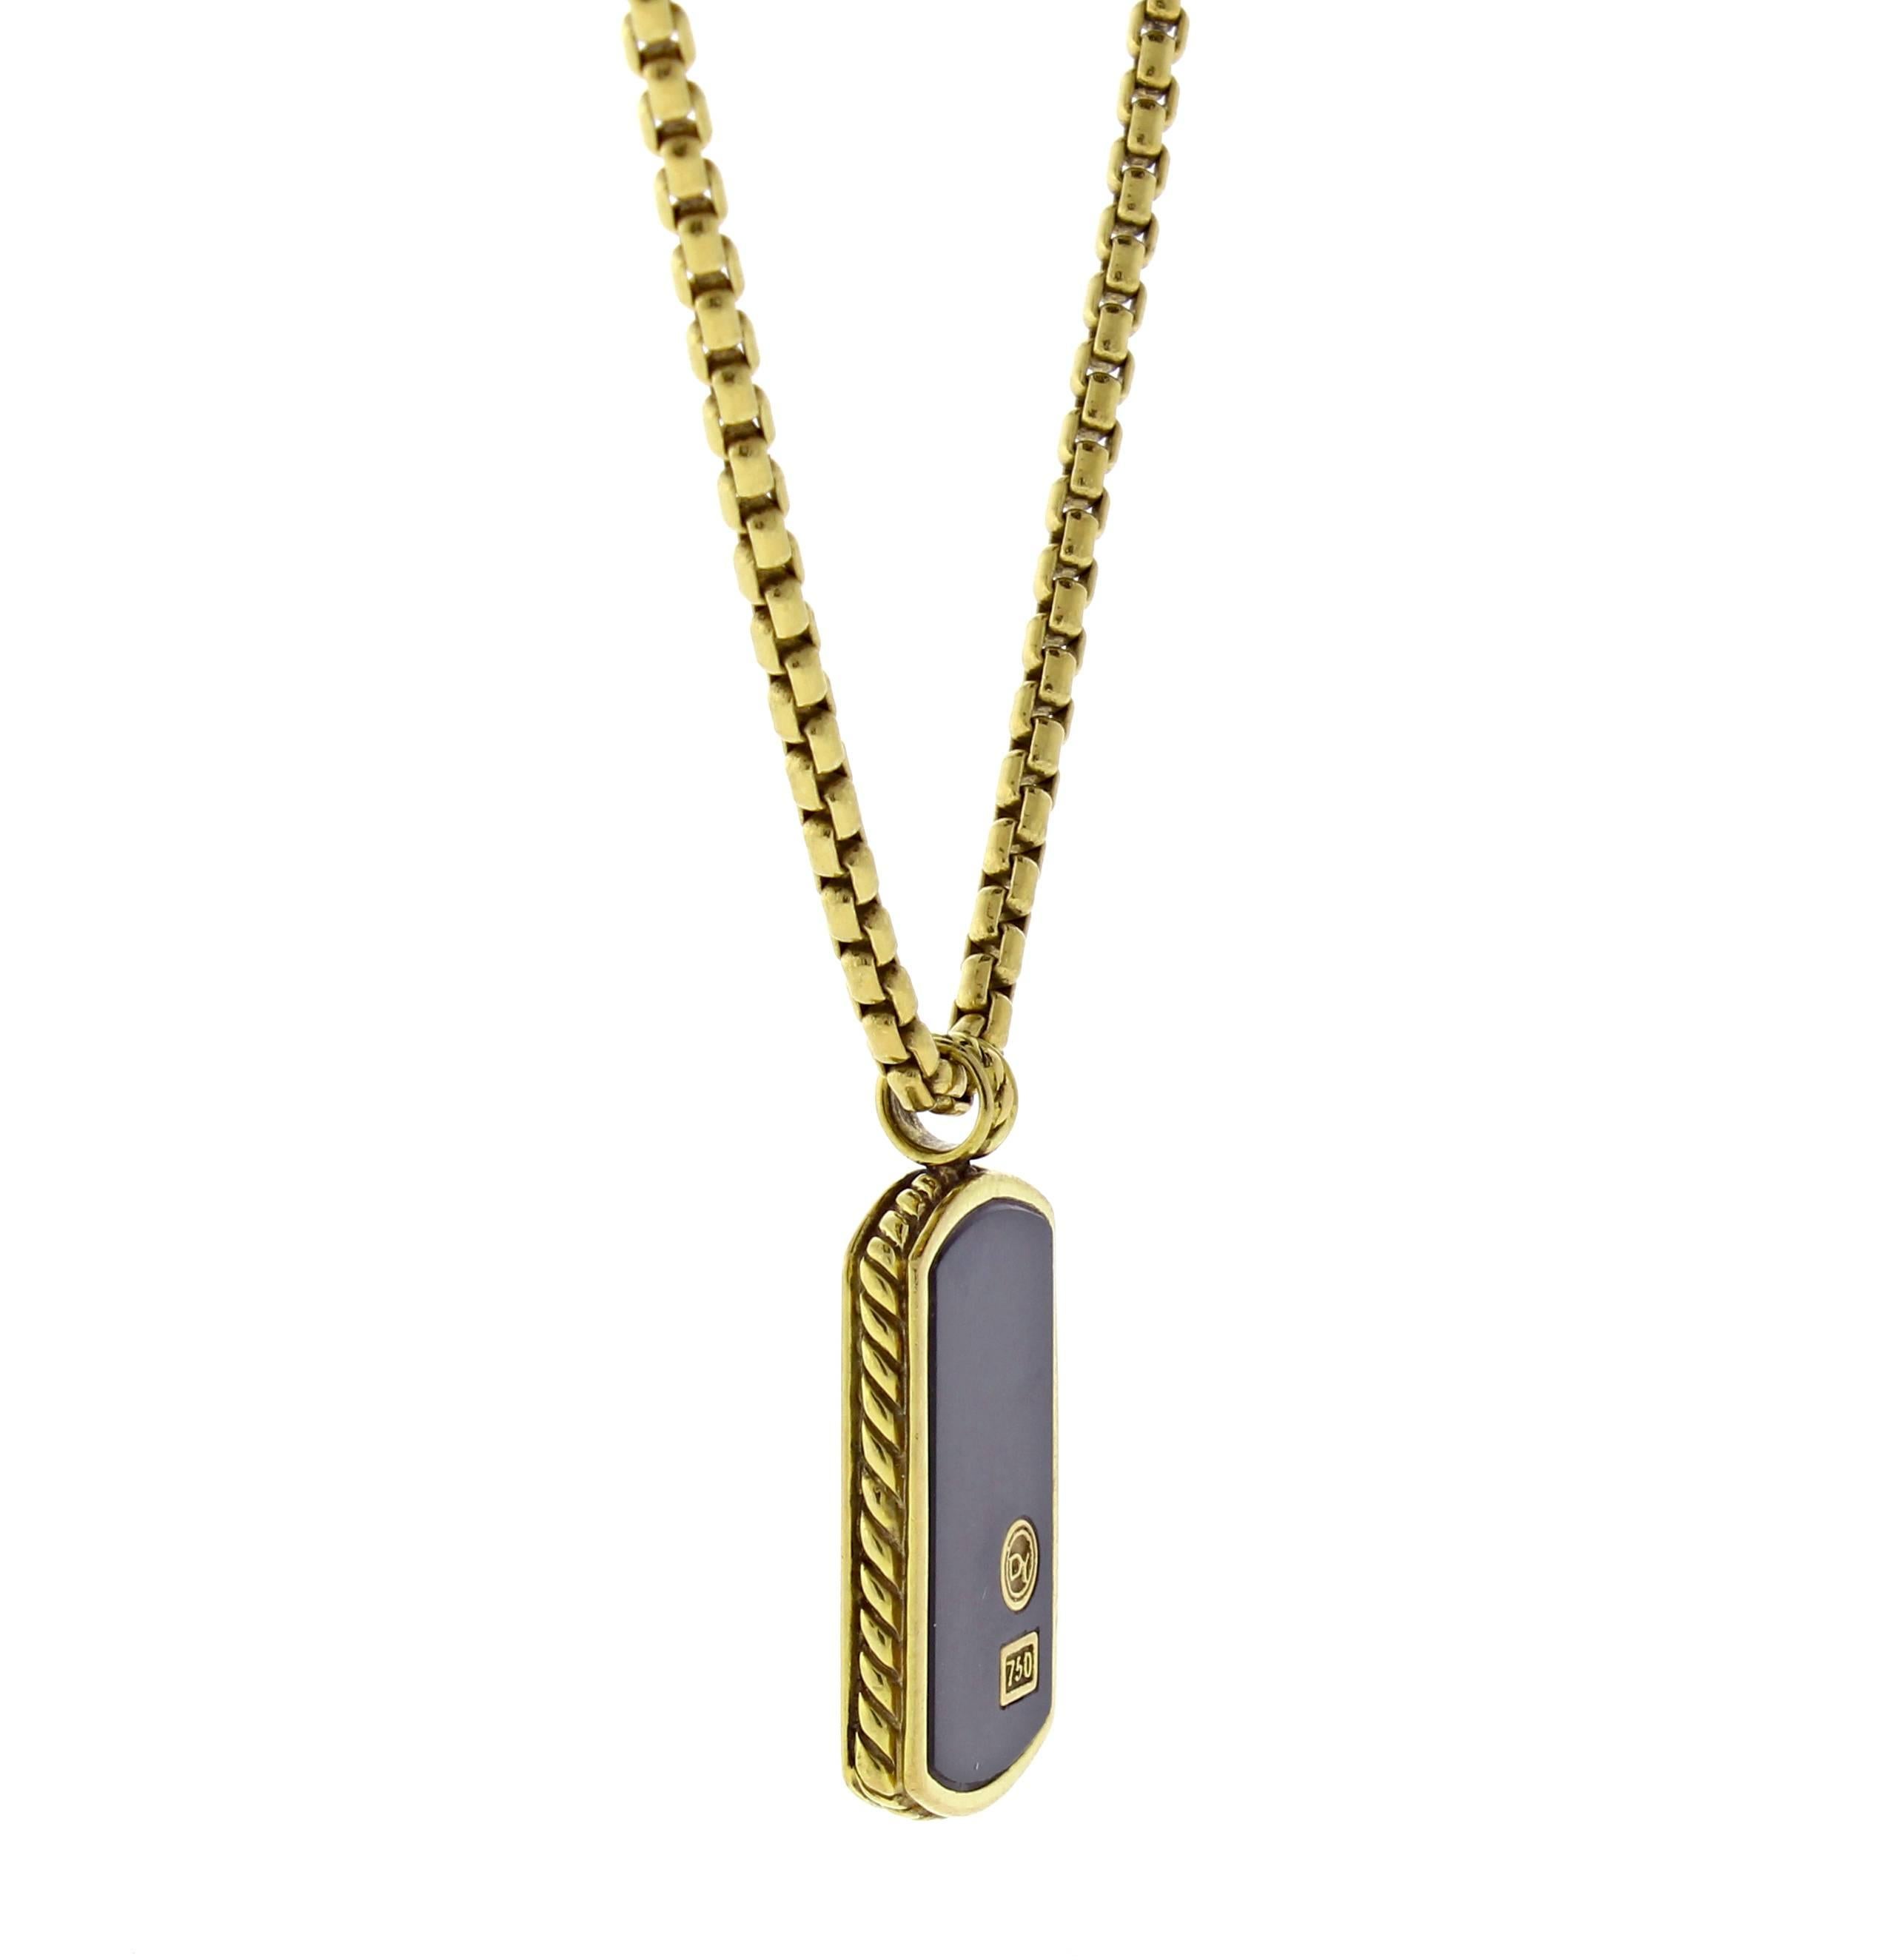 From David Yurman Exotics Collection, 18-karat yellow gold necklace with black onyx dog tag pendant and  2.5mm Box chain, 20